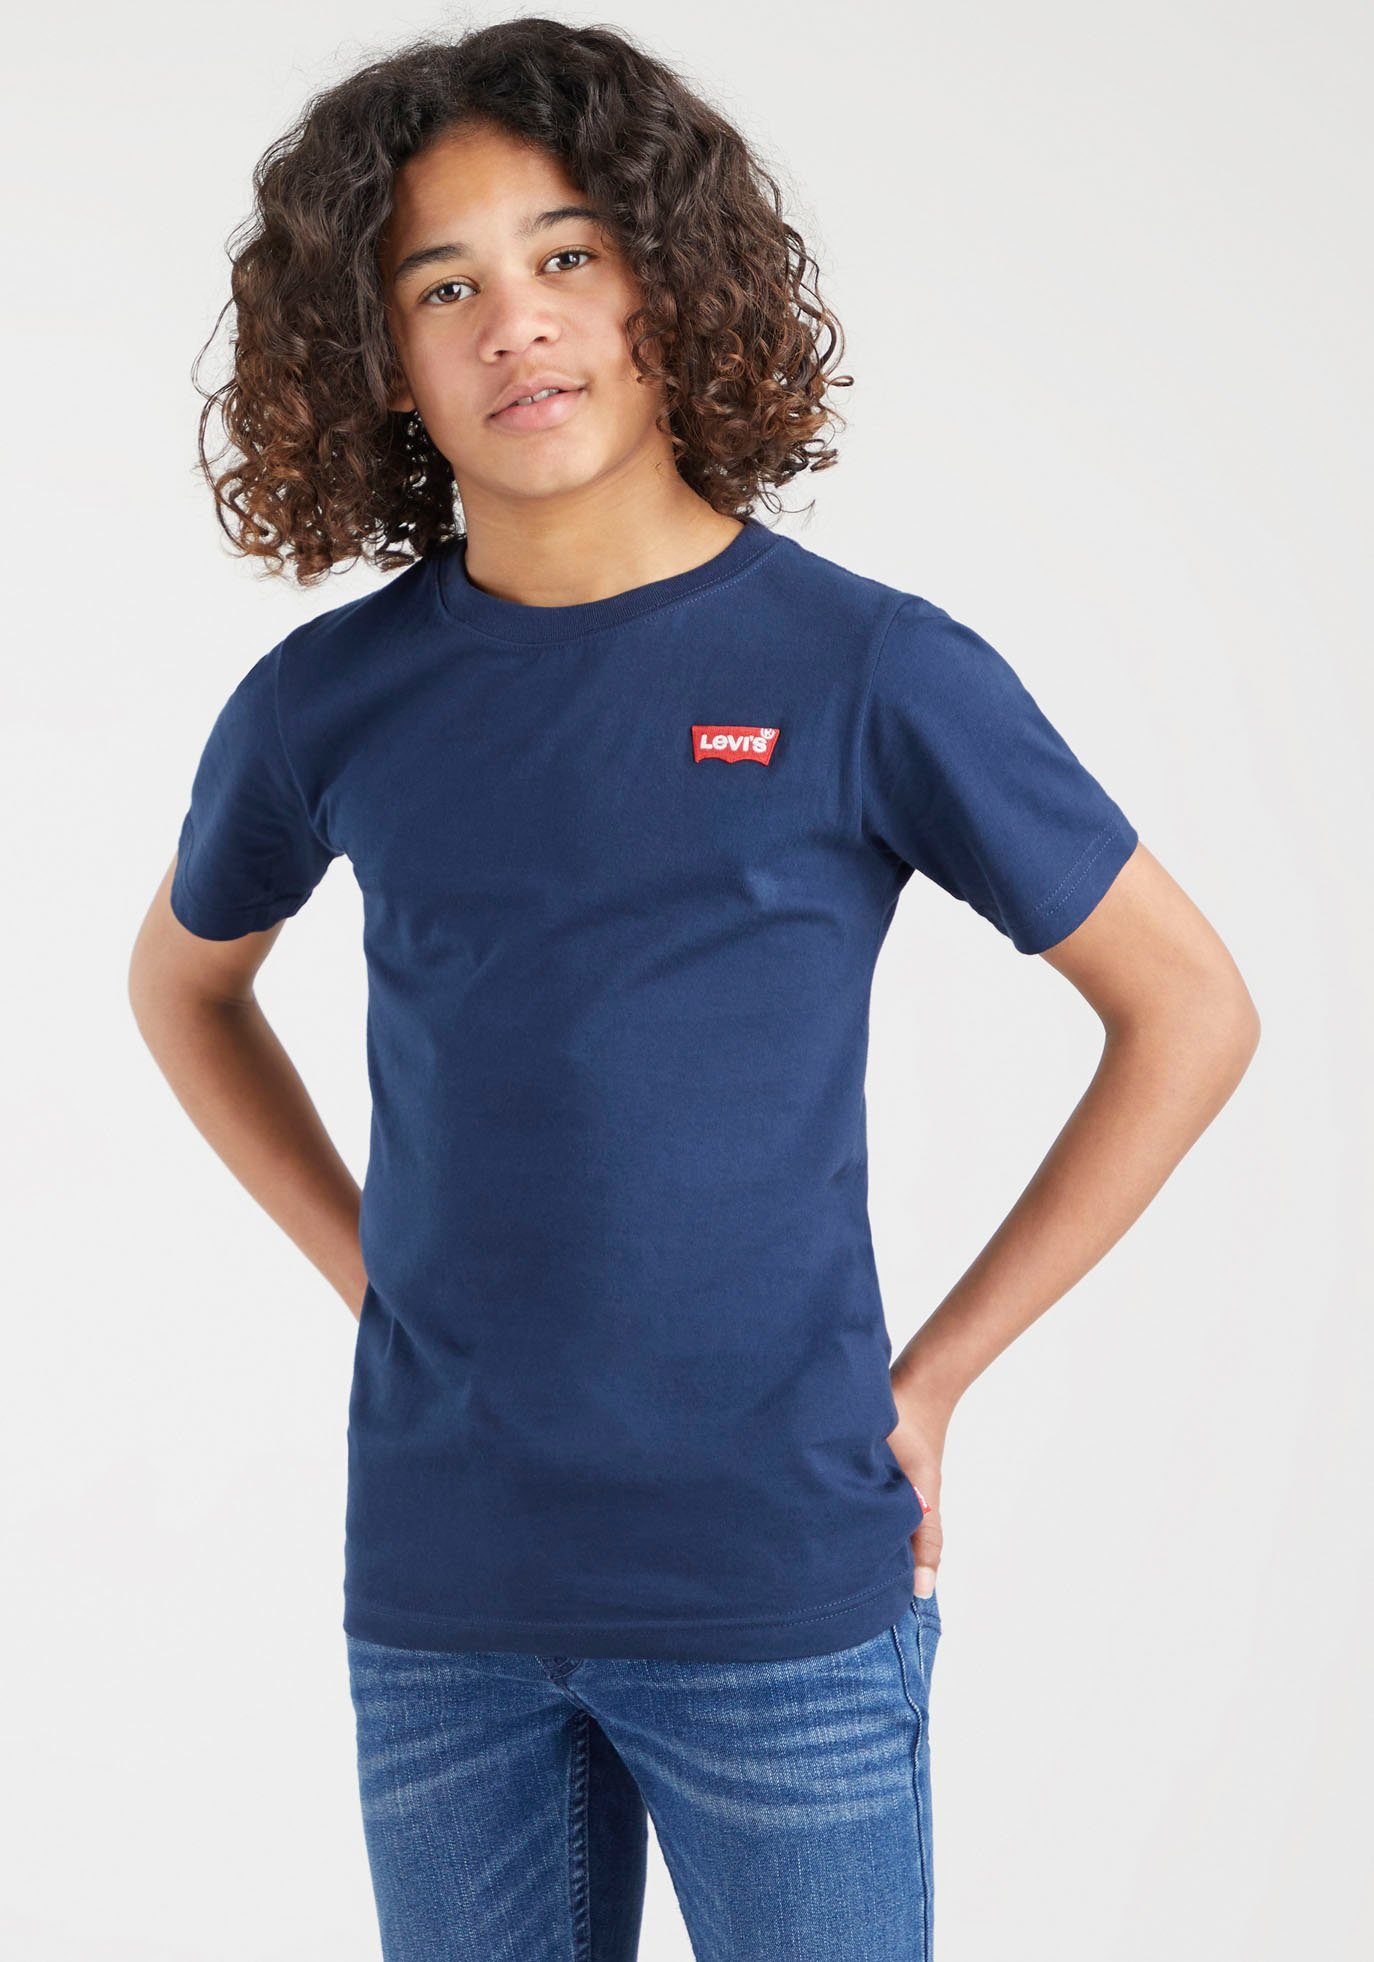 Levi's® Kids T-Shirt BATWING CHEST HIT for BOYS navy